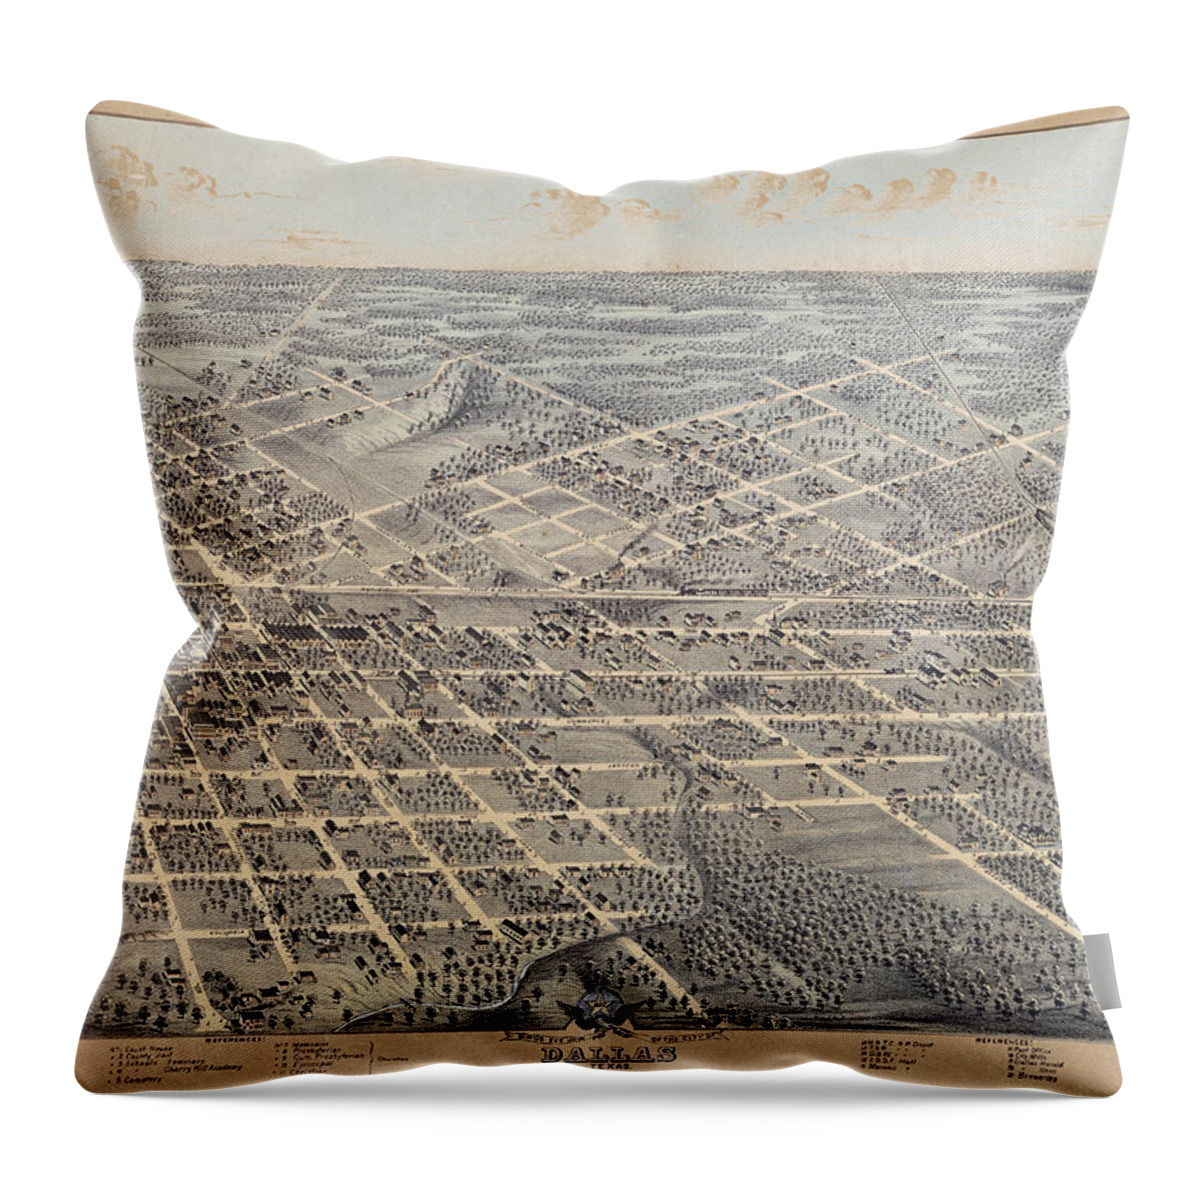 Texas Throw Pillow featuring the digital art Dallas 1872 by Herman Brosius by Texas Map Store